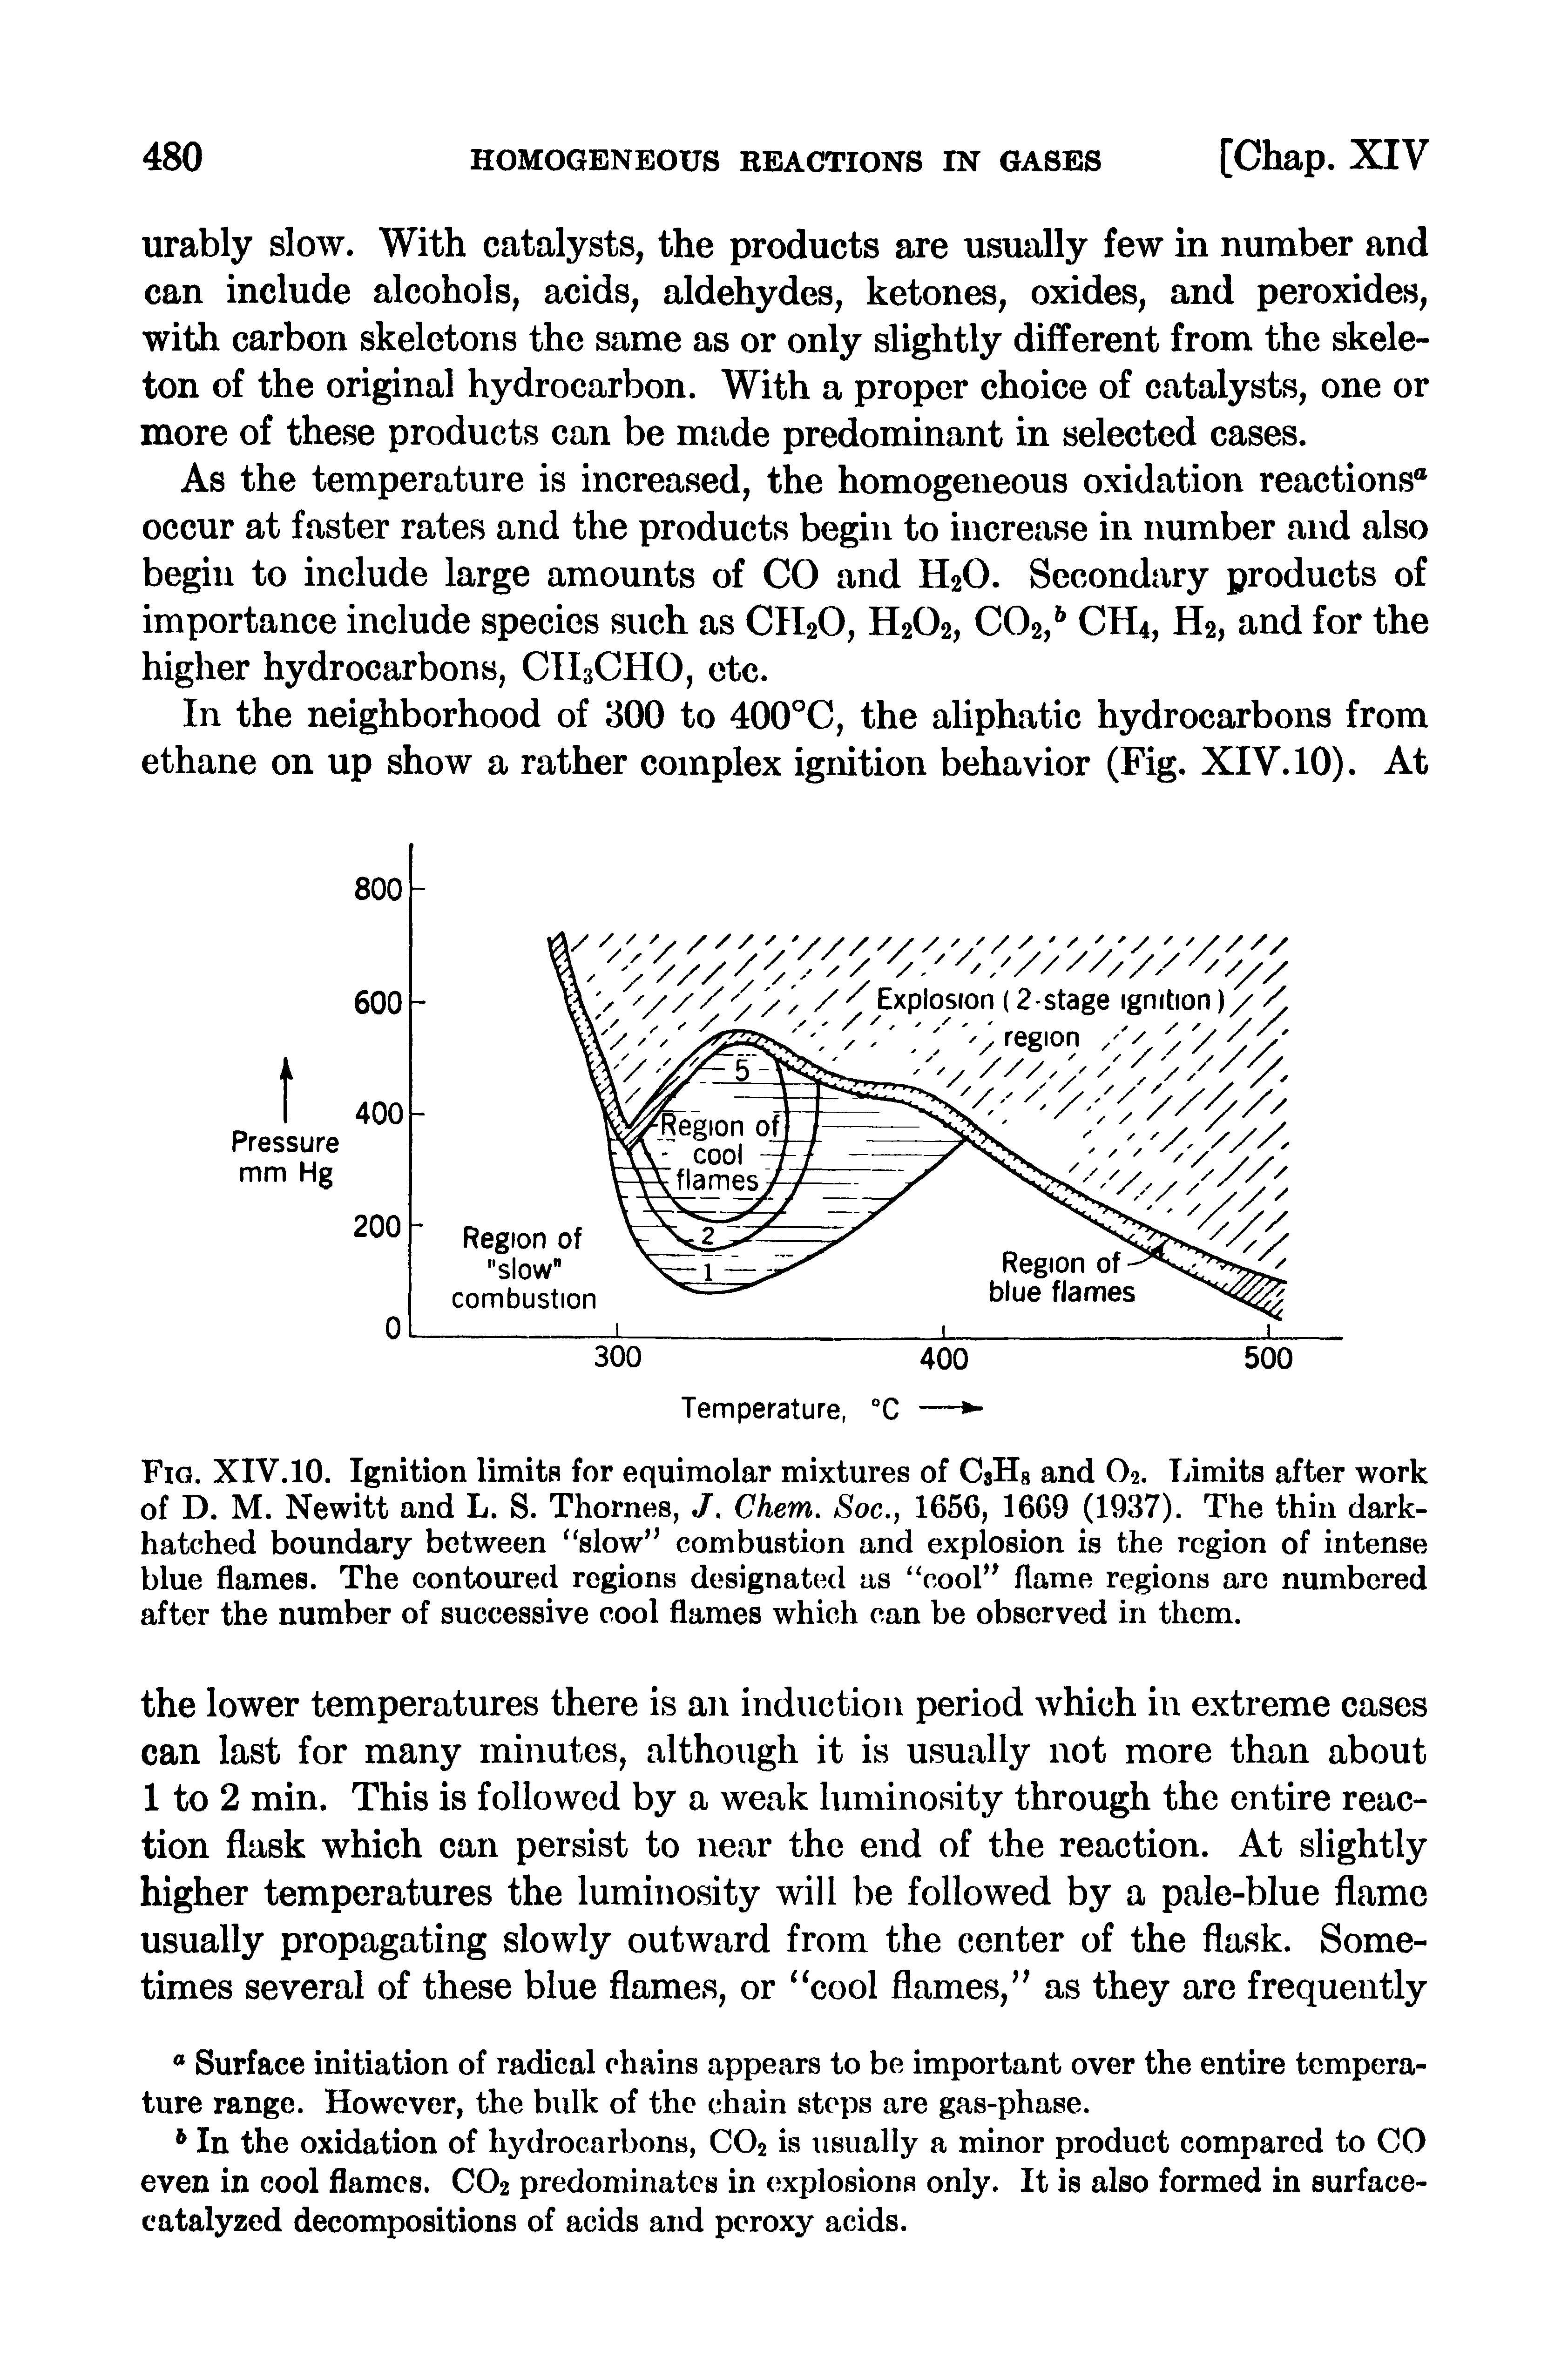 Fig. XIV. 10. Ignition limits for equimolar mixtures of CjHs and O2. Limits after work of D. M. Newitt and L. S. Thornes, J, Chem. Soc., 1656, 1669 (1937). The thin dark-hatched boundary between slow combustion and explosion is the region of intense blue flames. The contoured regions designated as cool flame regions arc numbered after the number of successive cool flames which can be observed in them.